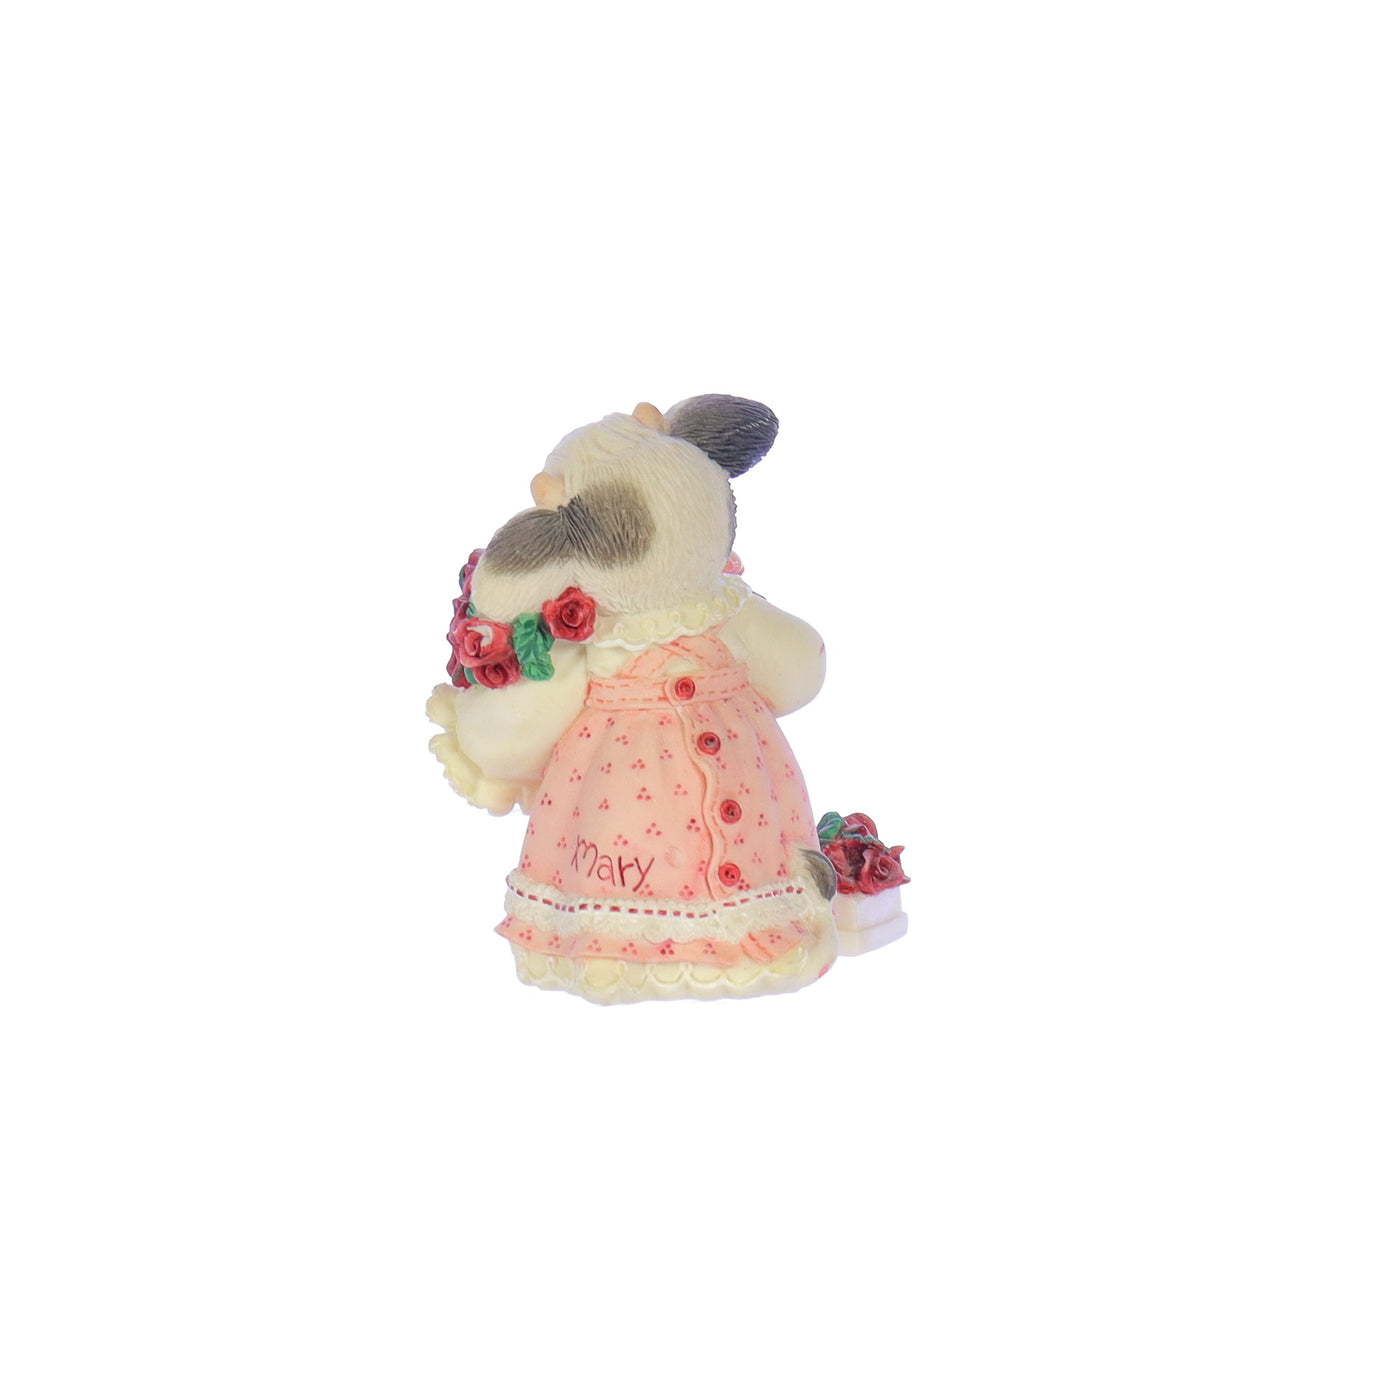 Marys-Moo-Moos-by-Mary-Rhyner-Nadig-Resin-Figurine-February-Im-Just-A-Cow-Who-Cant-Say-No-257451